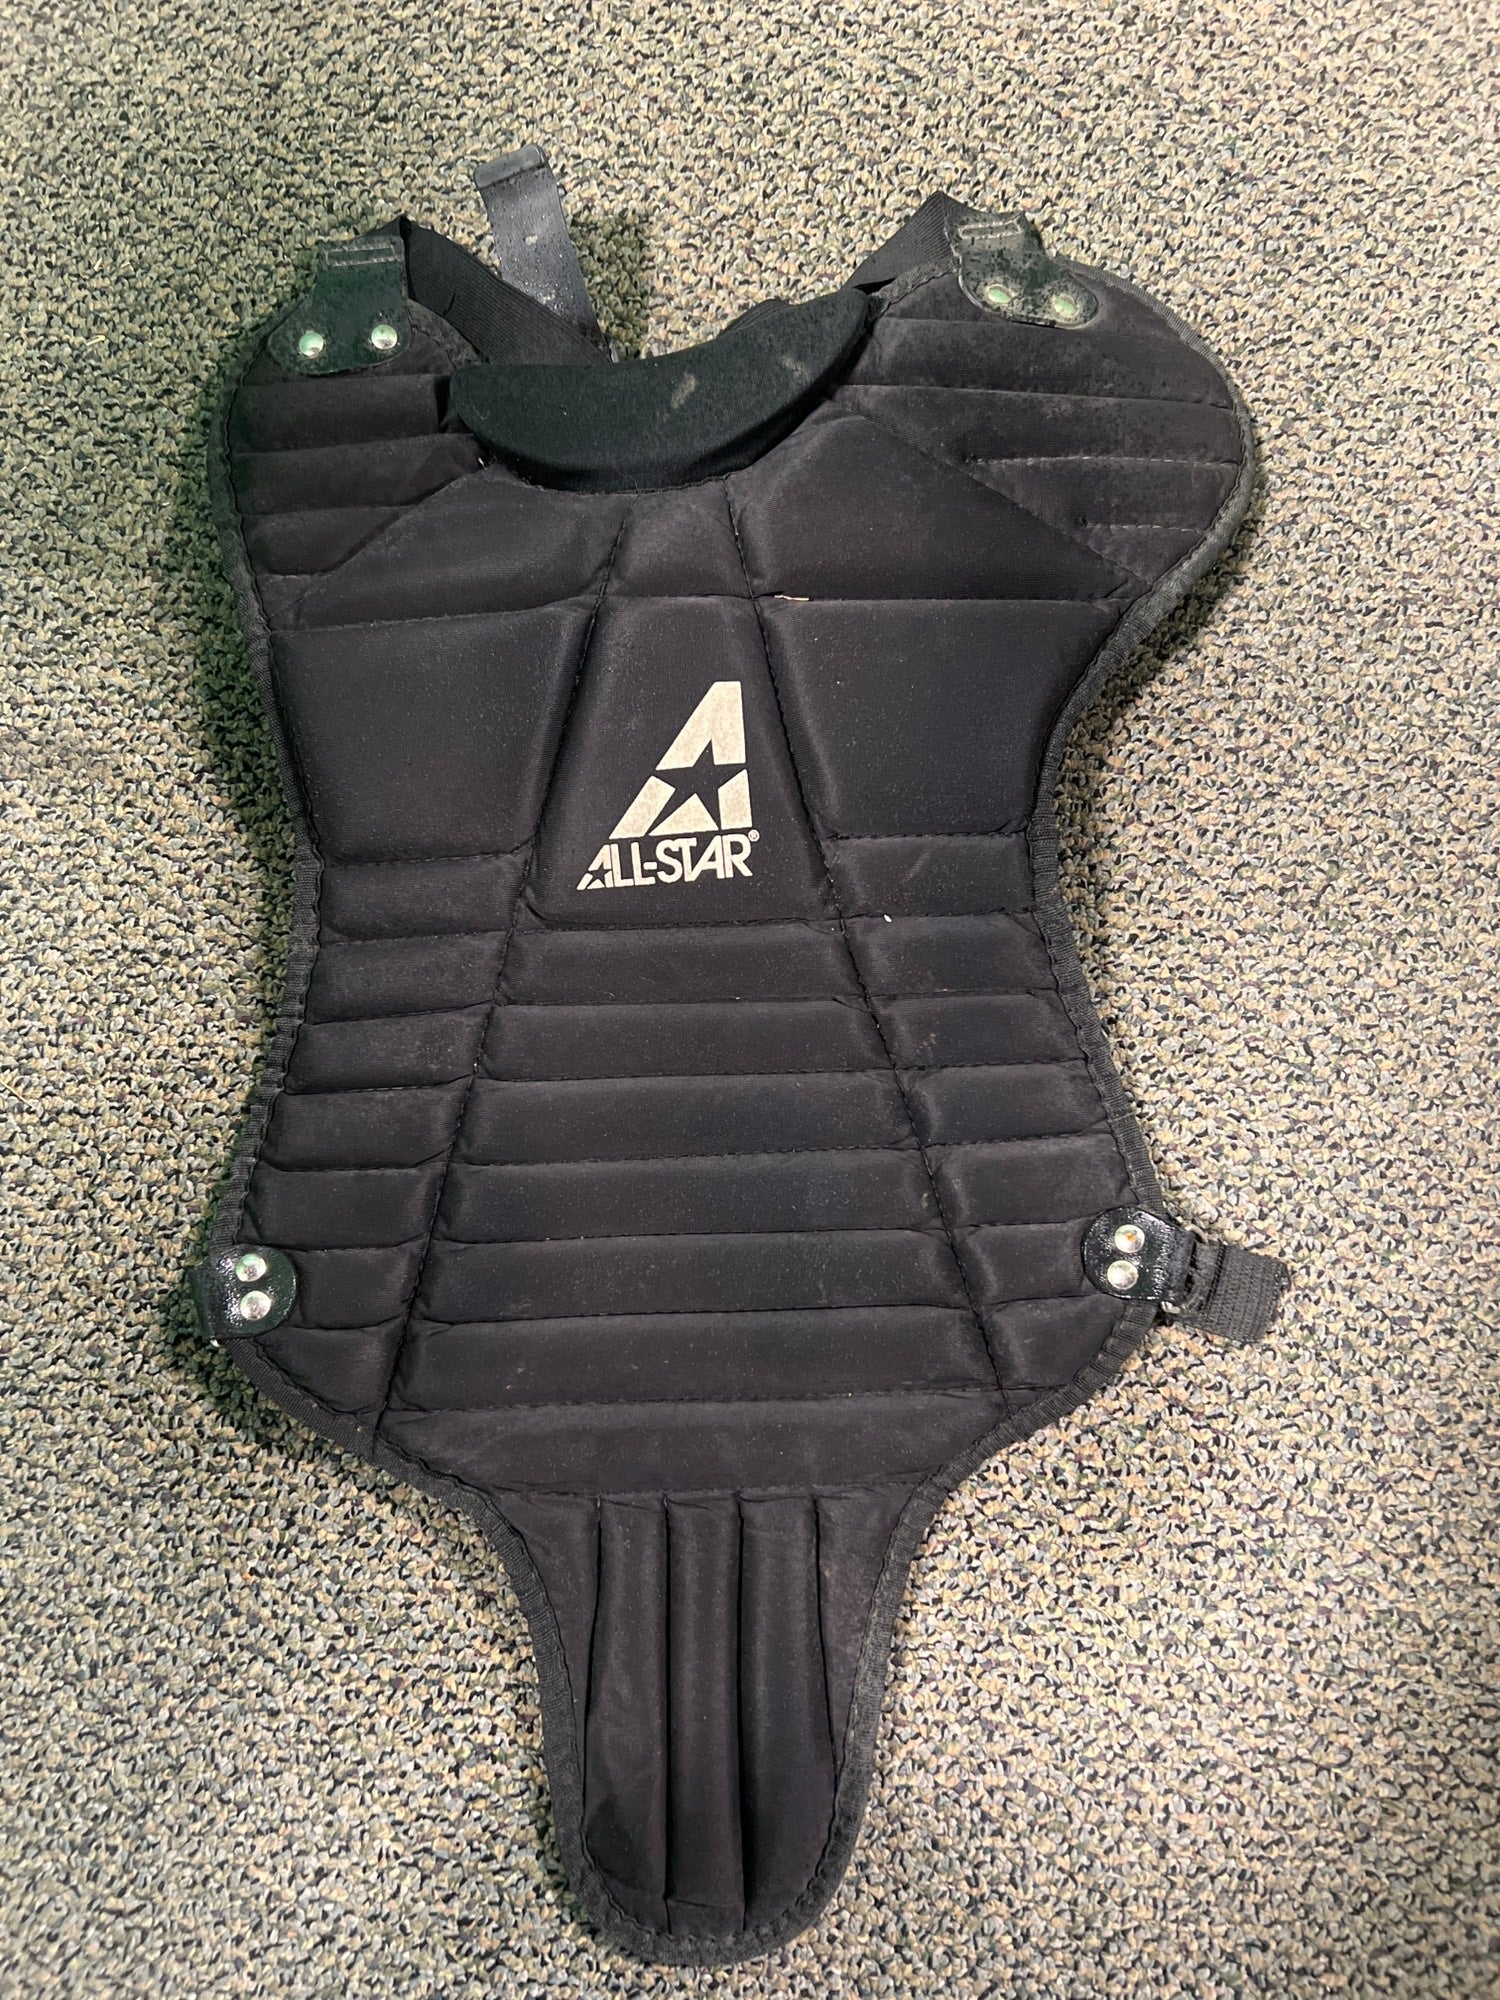 All Star Catcher's Chest Protector (1121)